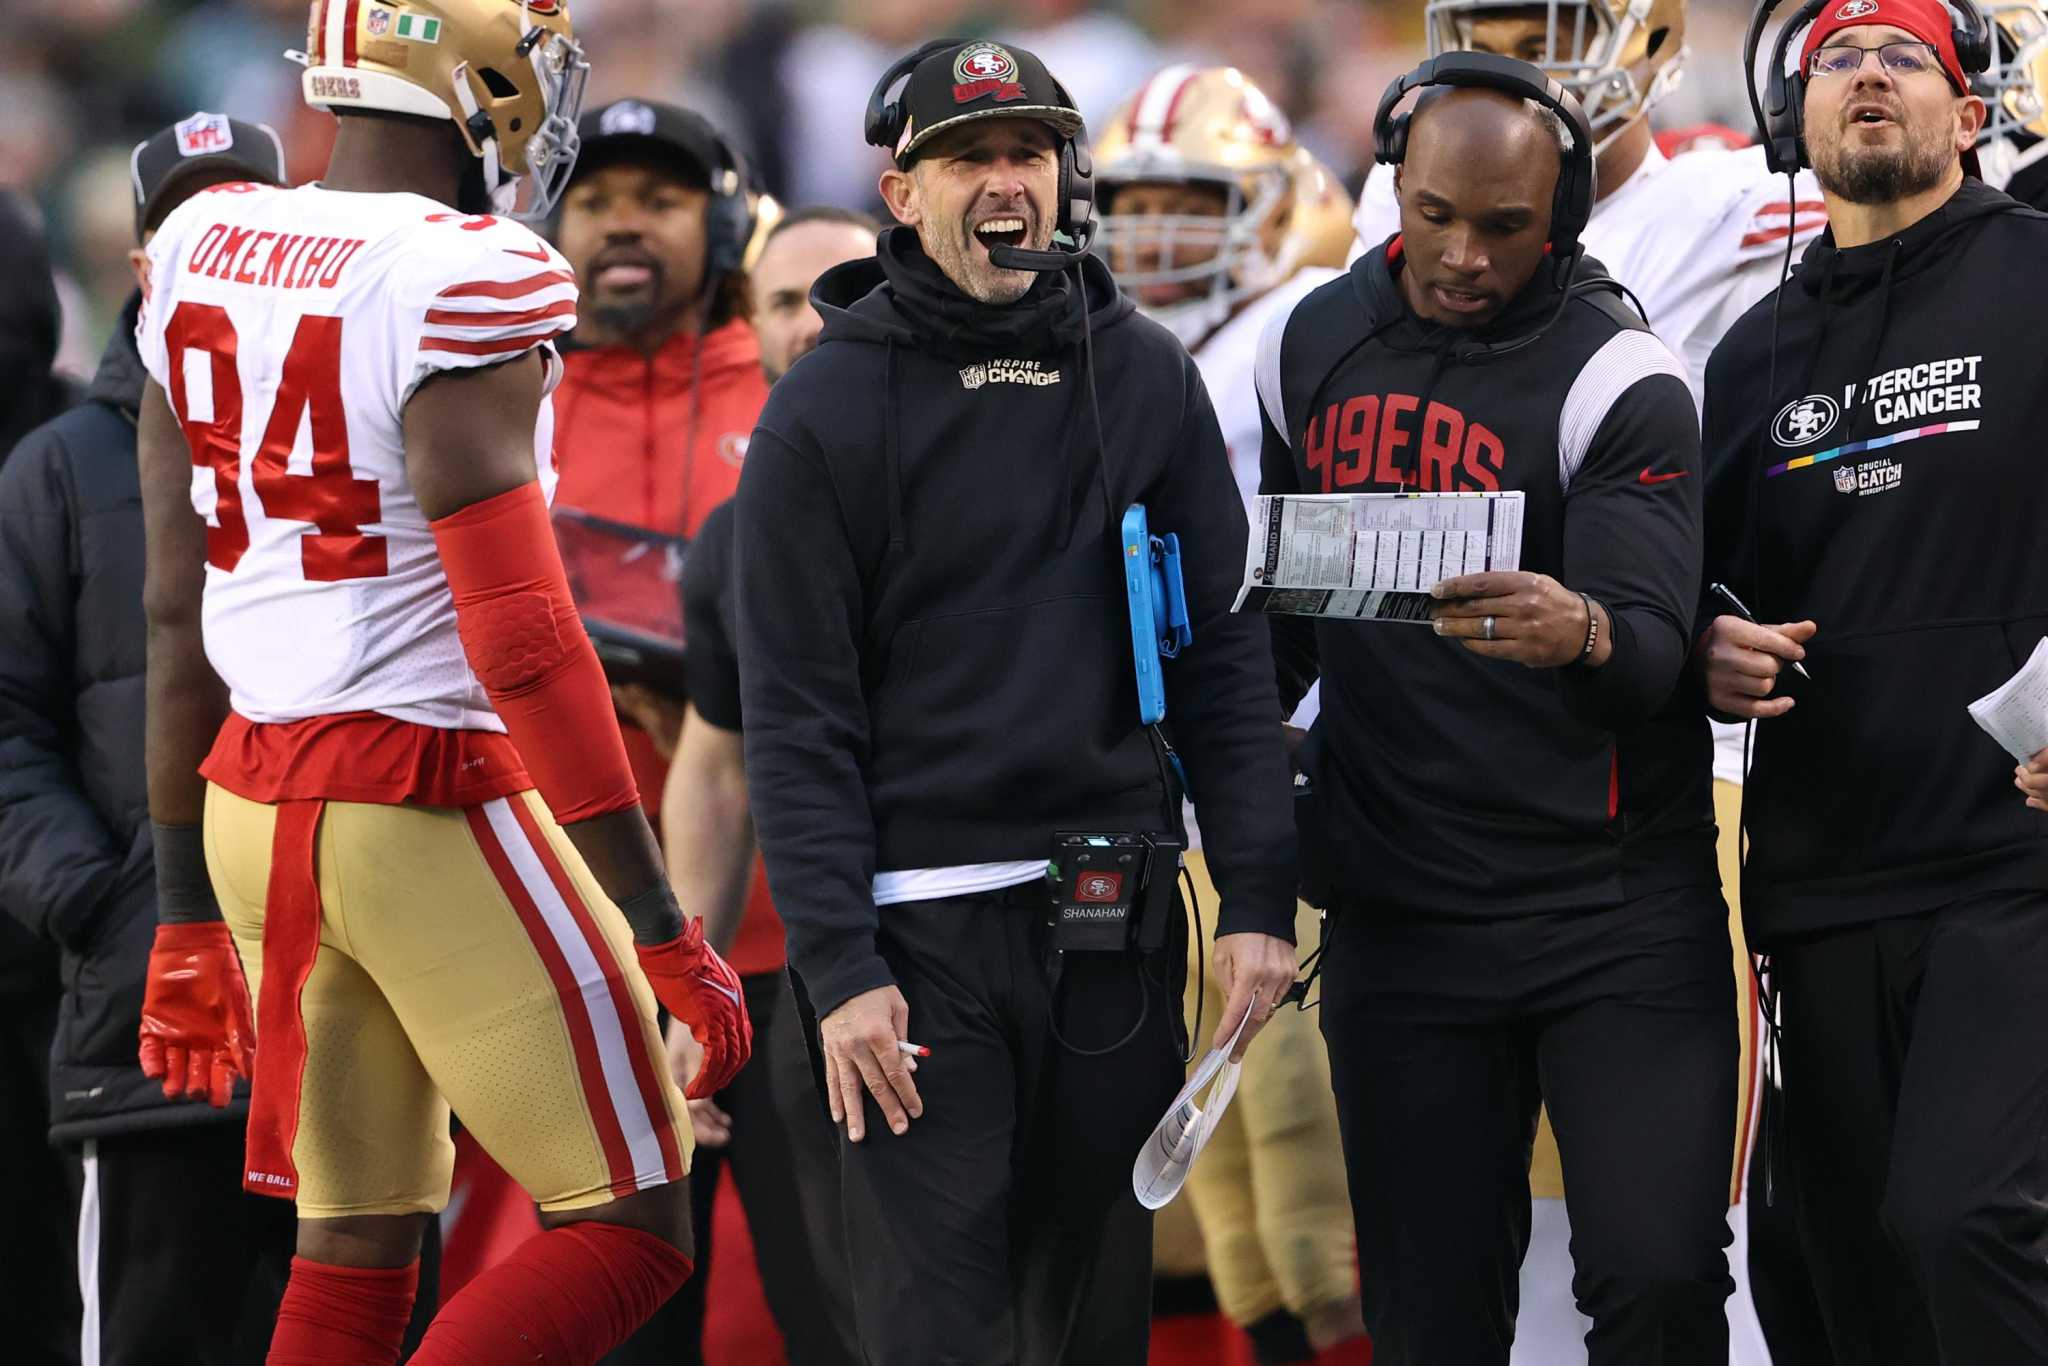 Bad calls, bum refs & banged-up QBs: 49ers' Lemony Snicket loss had it all